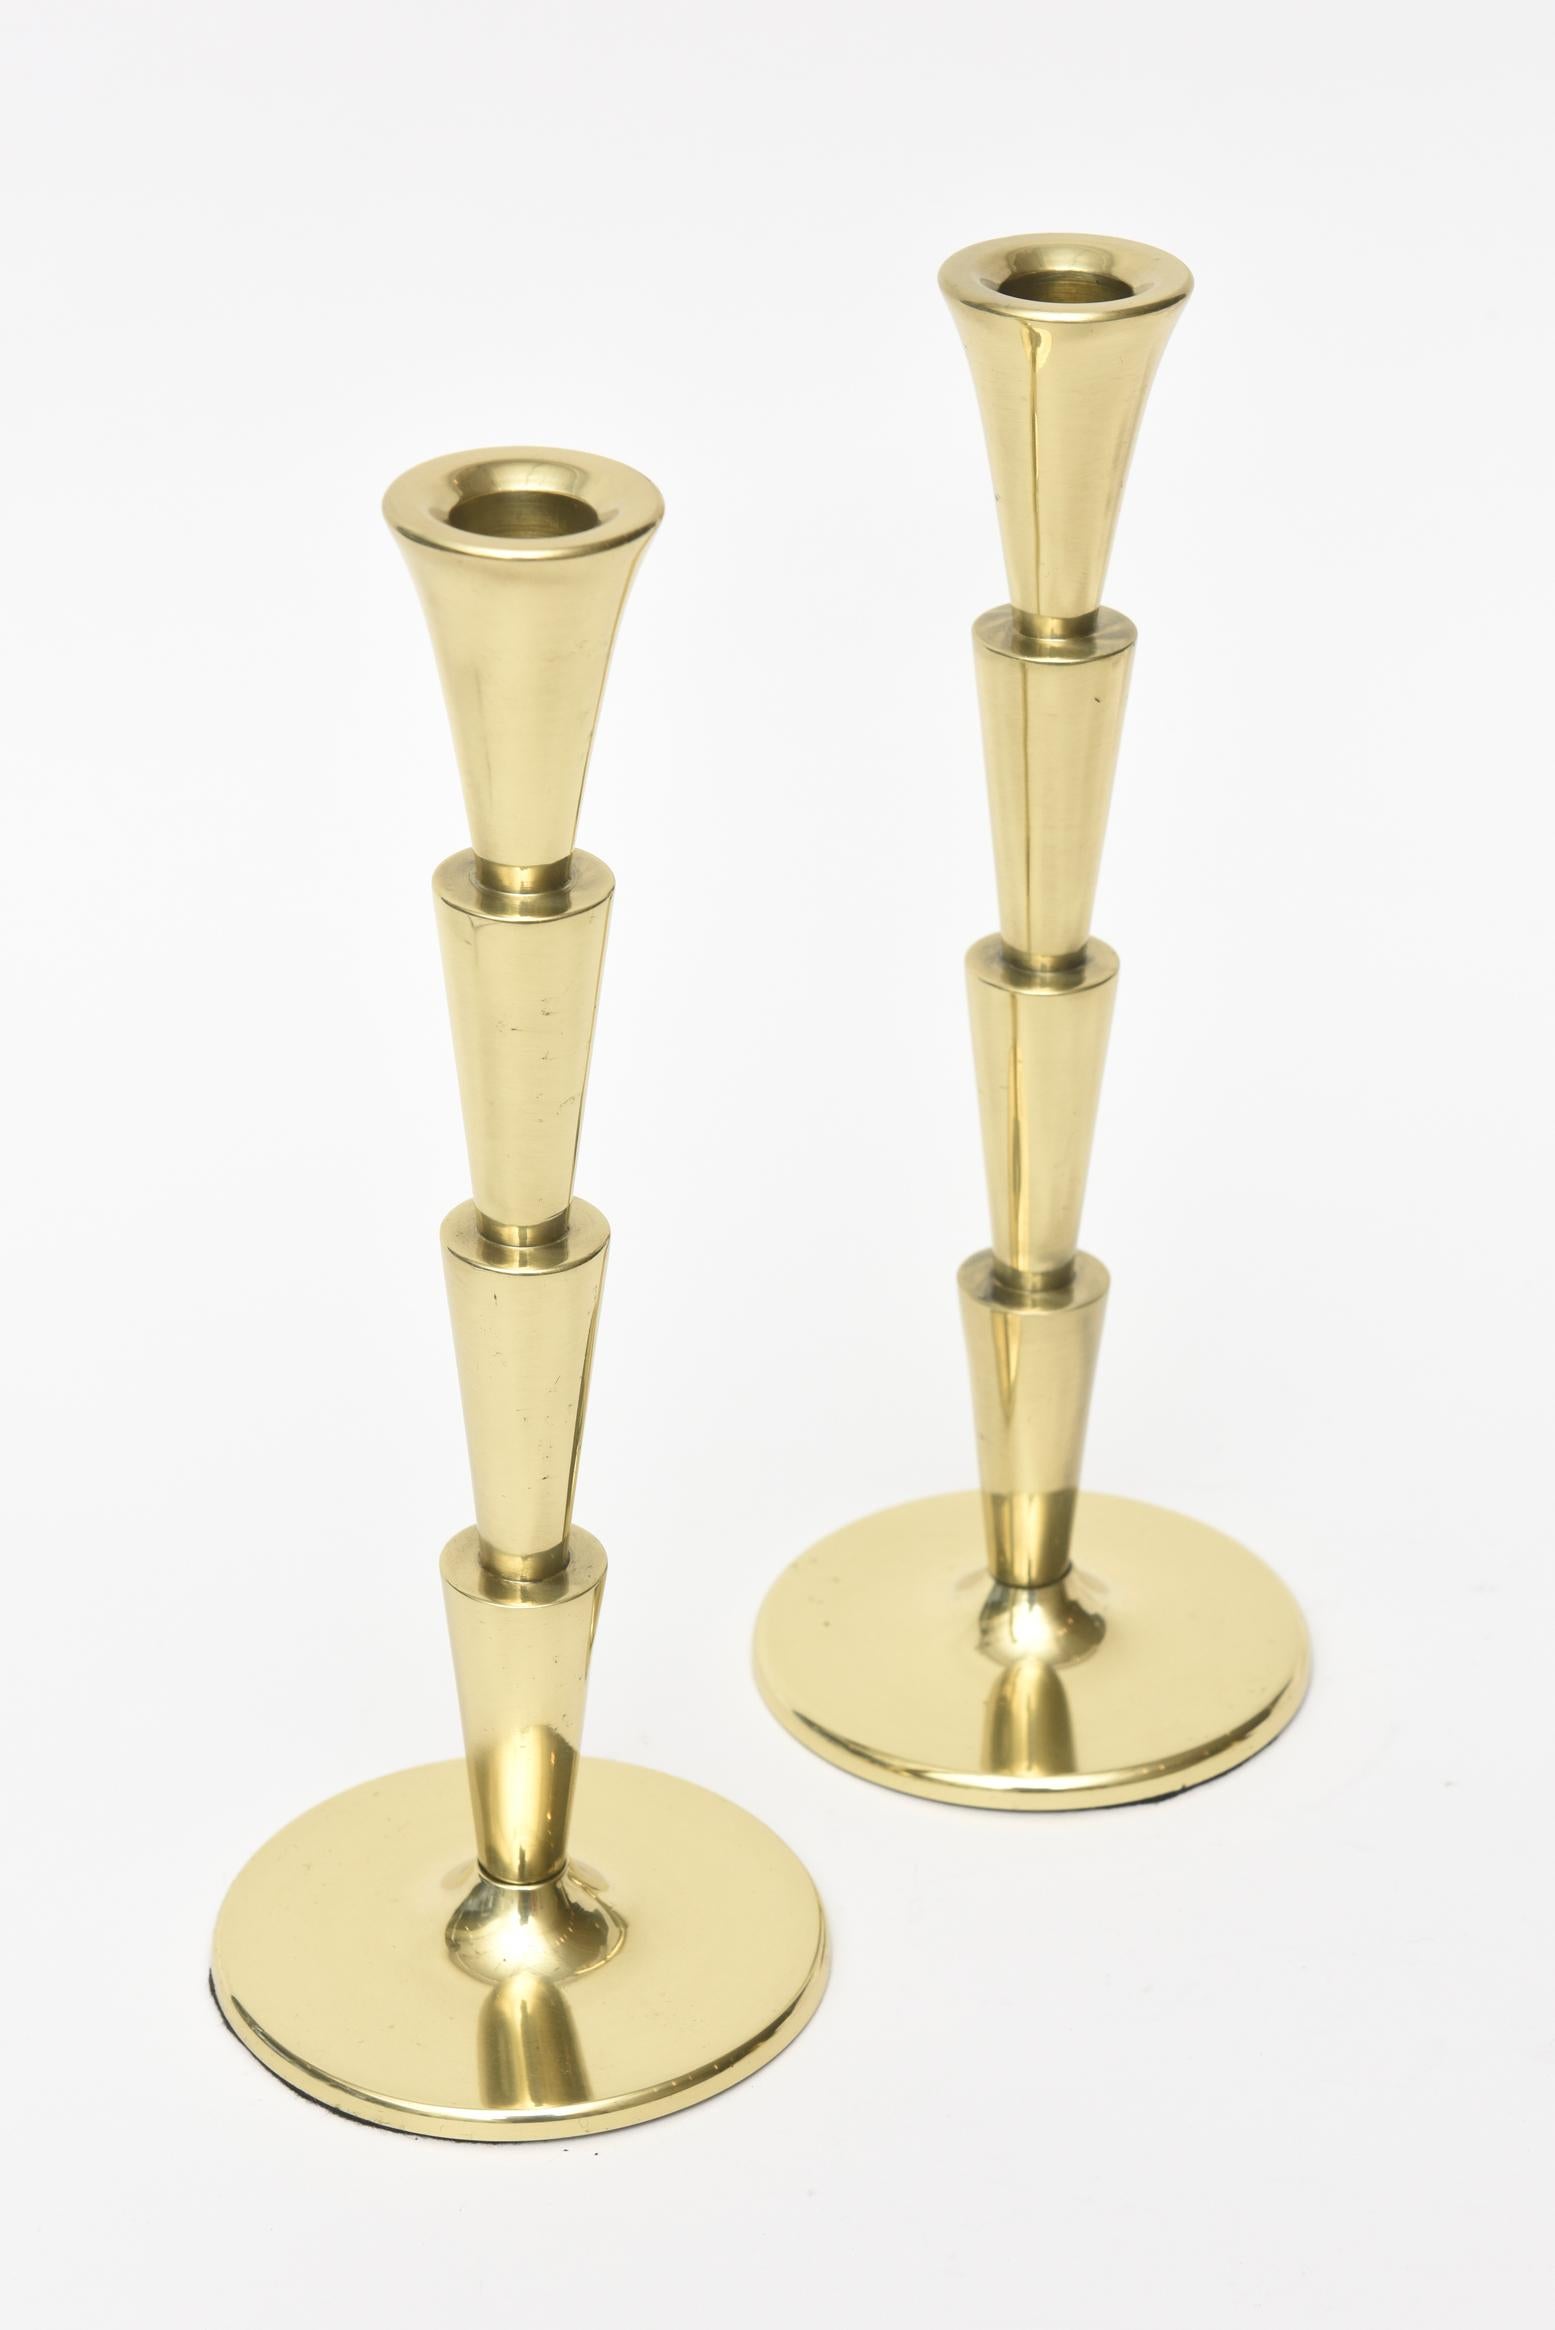 These lovely pair of polished brass Art Deco candlesticks have inverted half conical as the column-form. They sit on a round base. They remain today modern and neutral. They are solid and have great weight. New black felt was put on the bottom. They